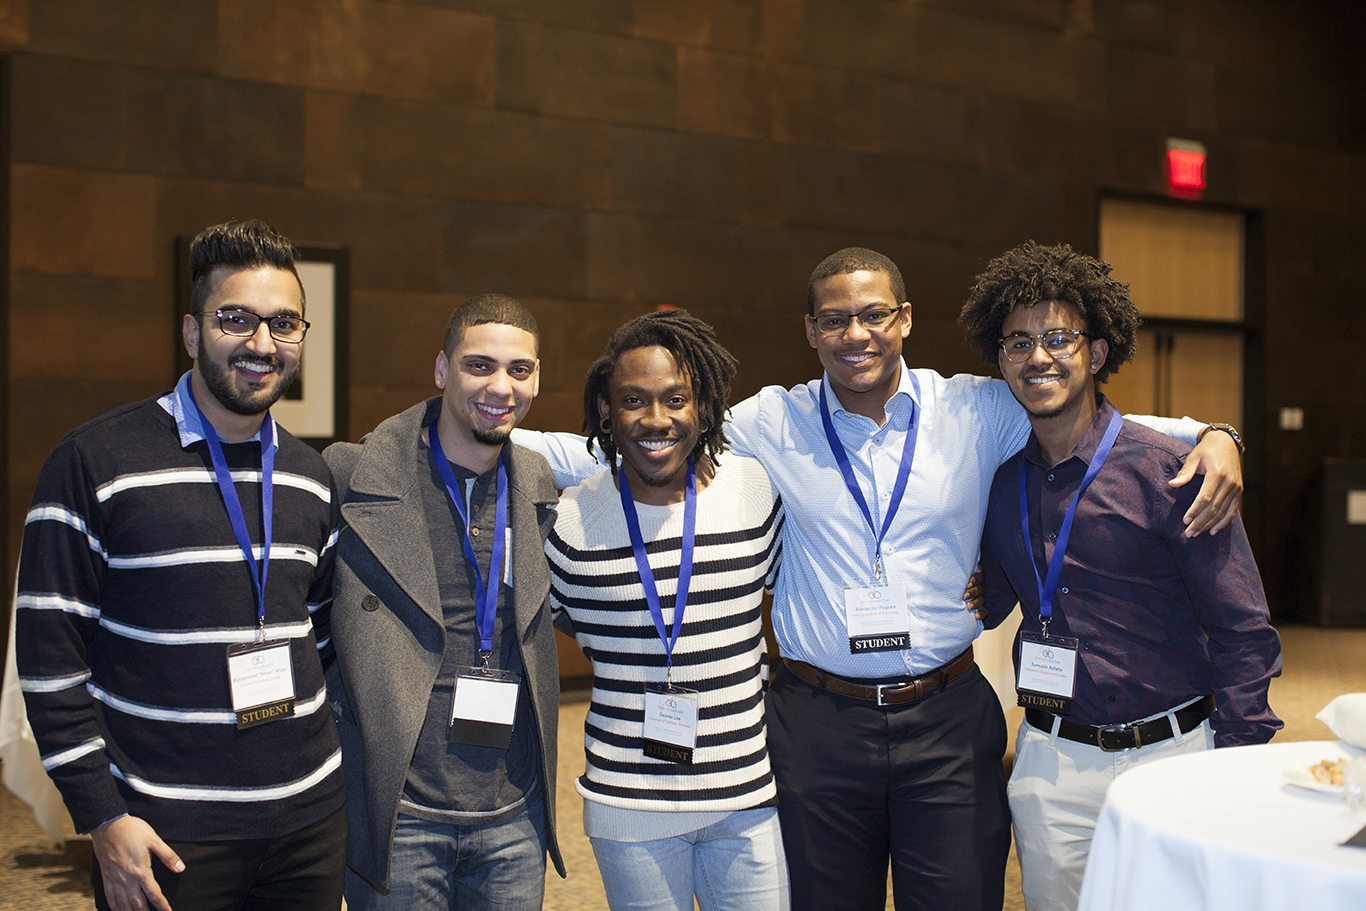 Group of students smiling at a conference.